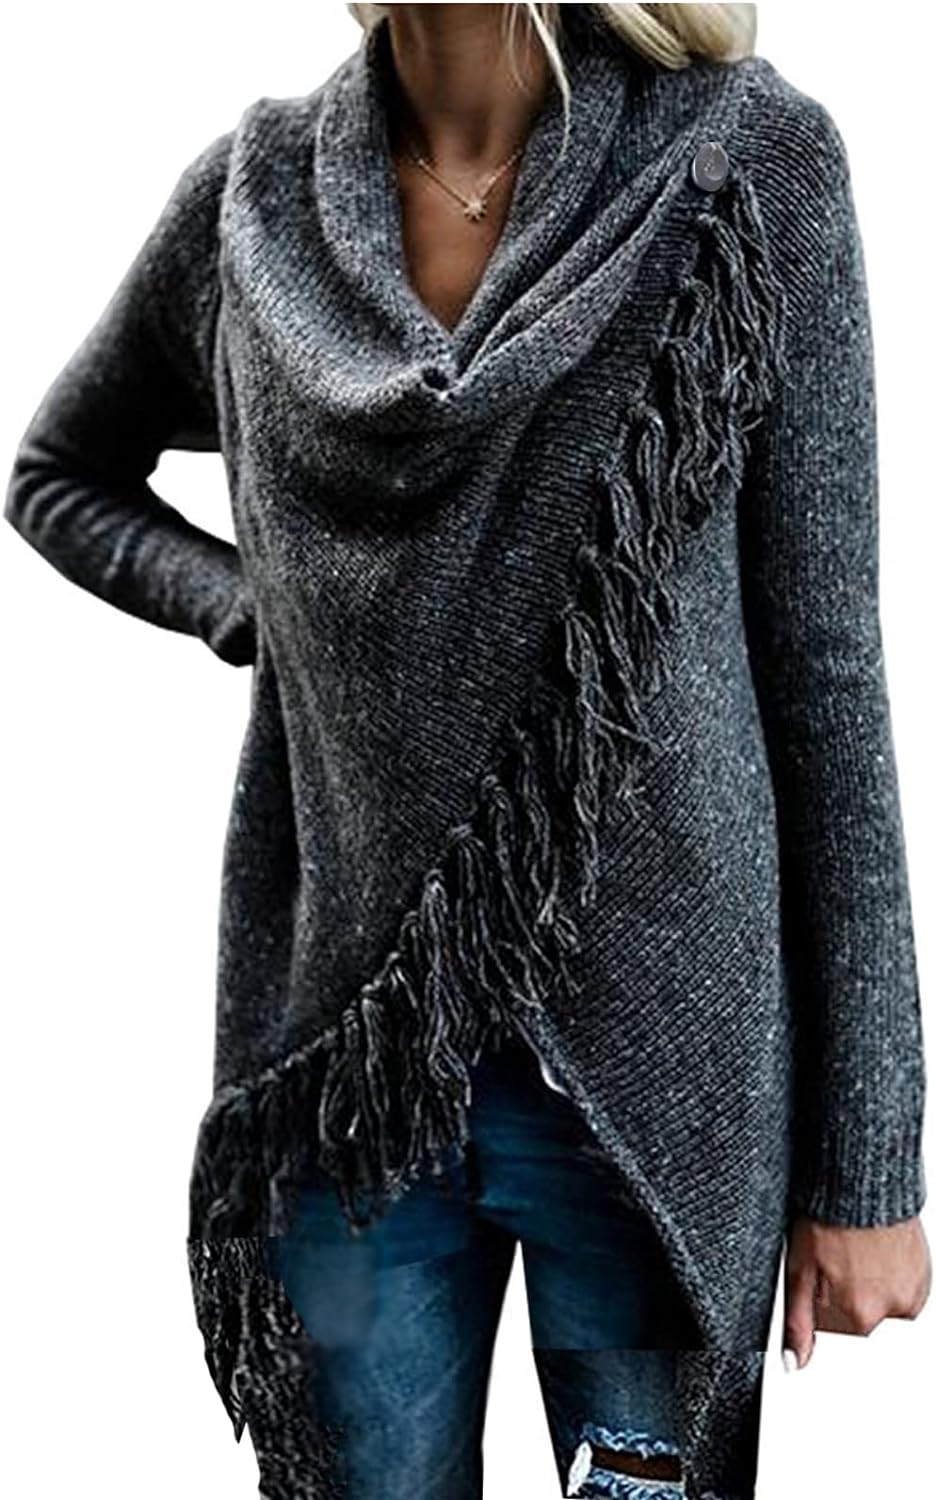 Seize the Opportunity! Women's Open Front Knited Tassels Slash Loose Cardigan at Exclusive Discount - Limited Time Offer!